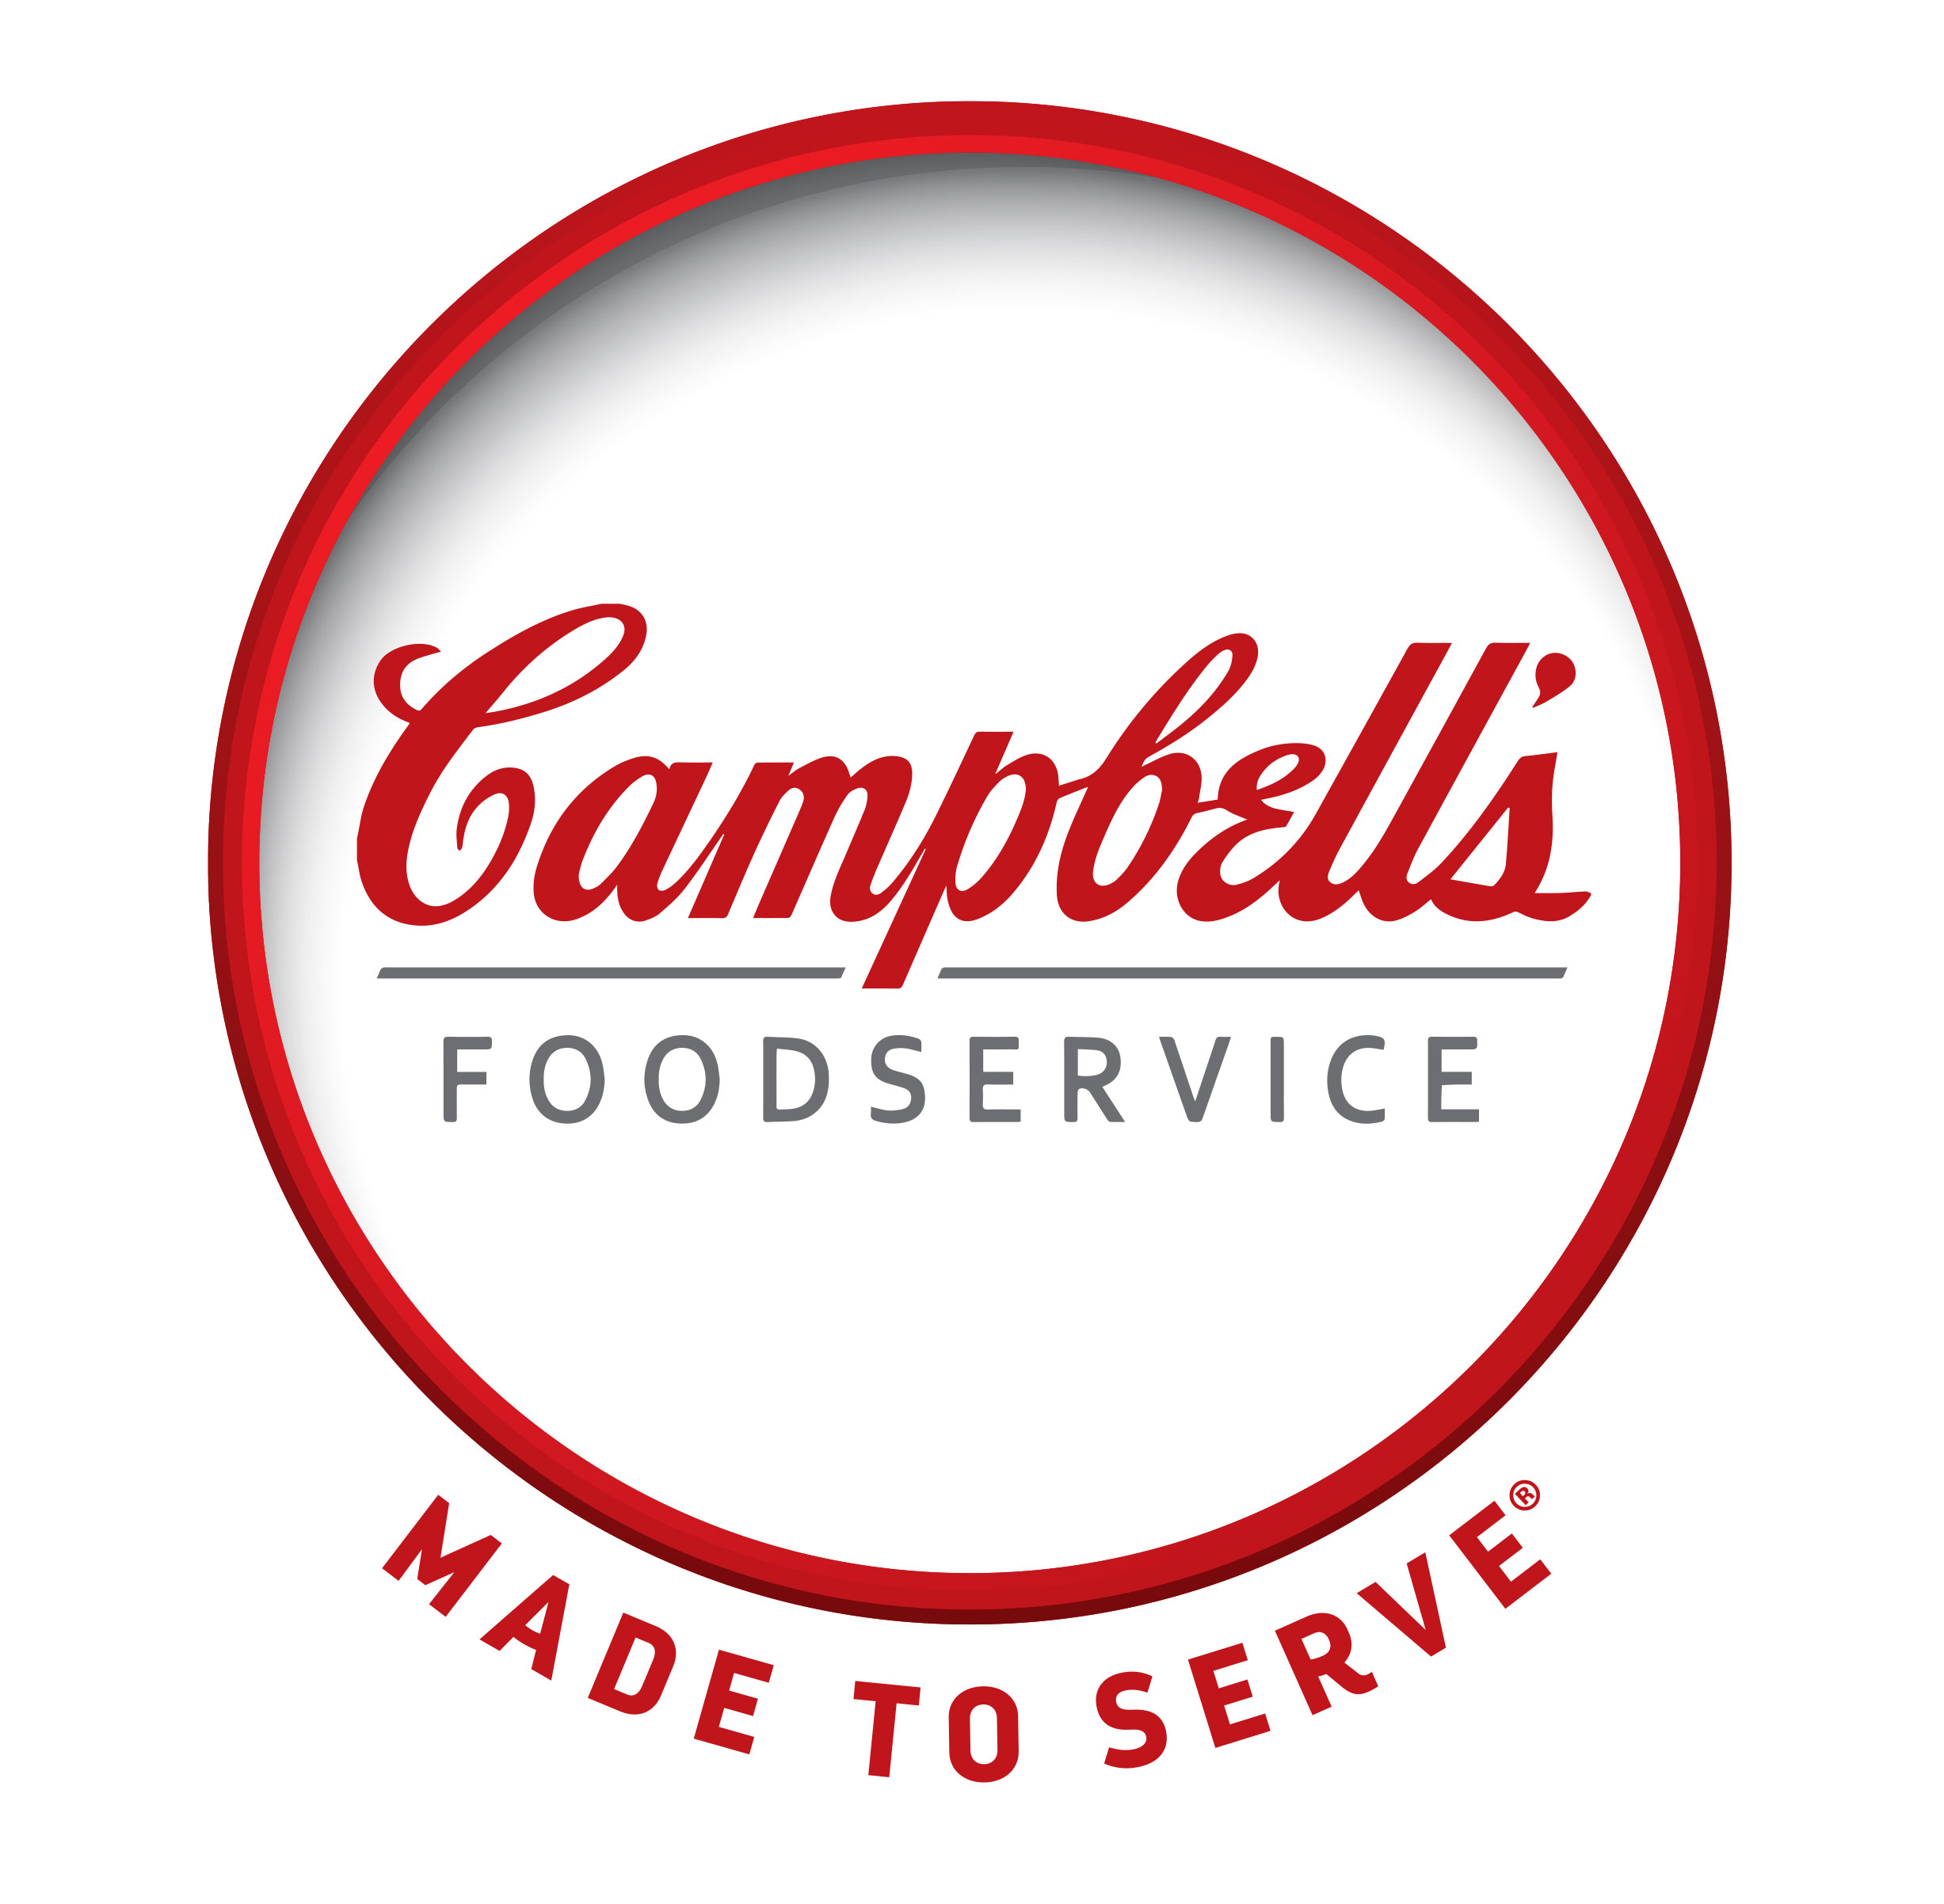 Campbell's Foodservice